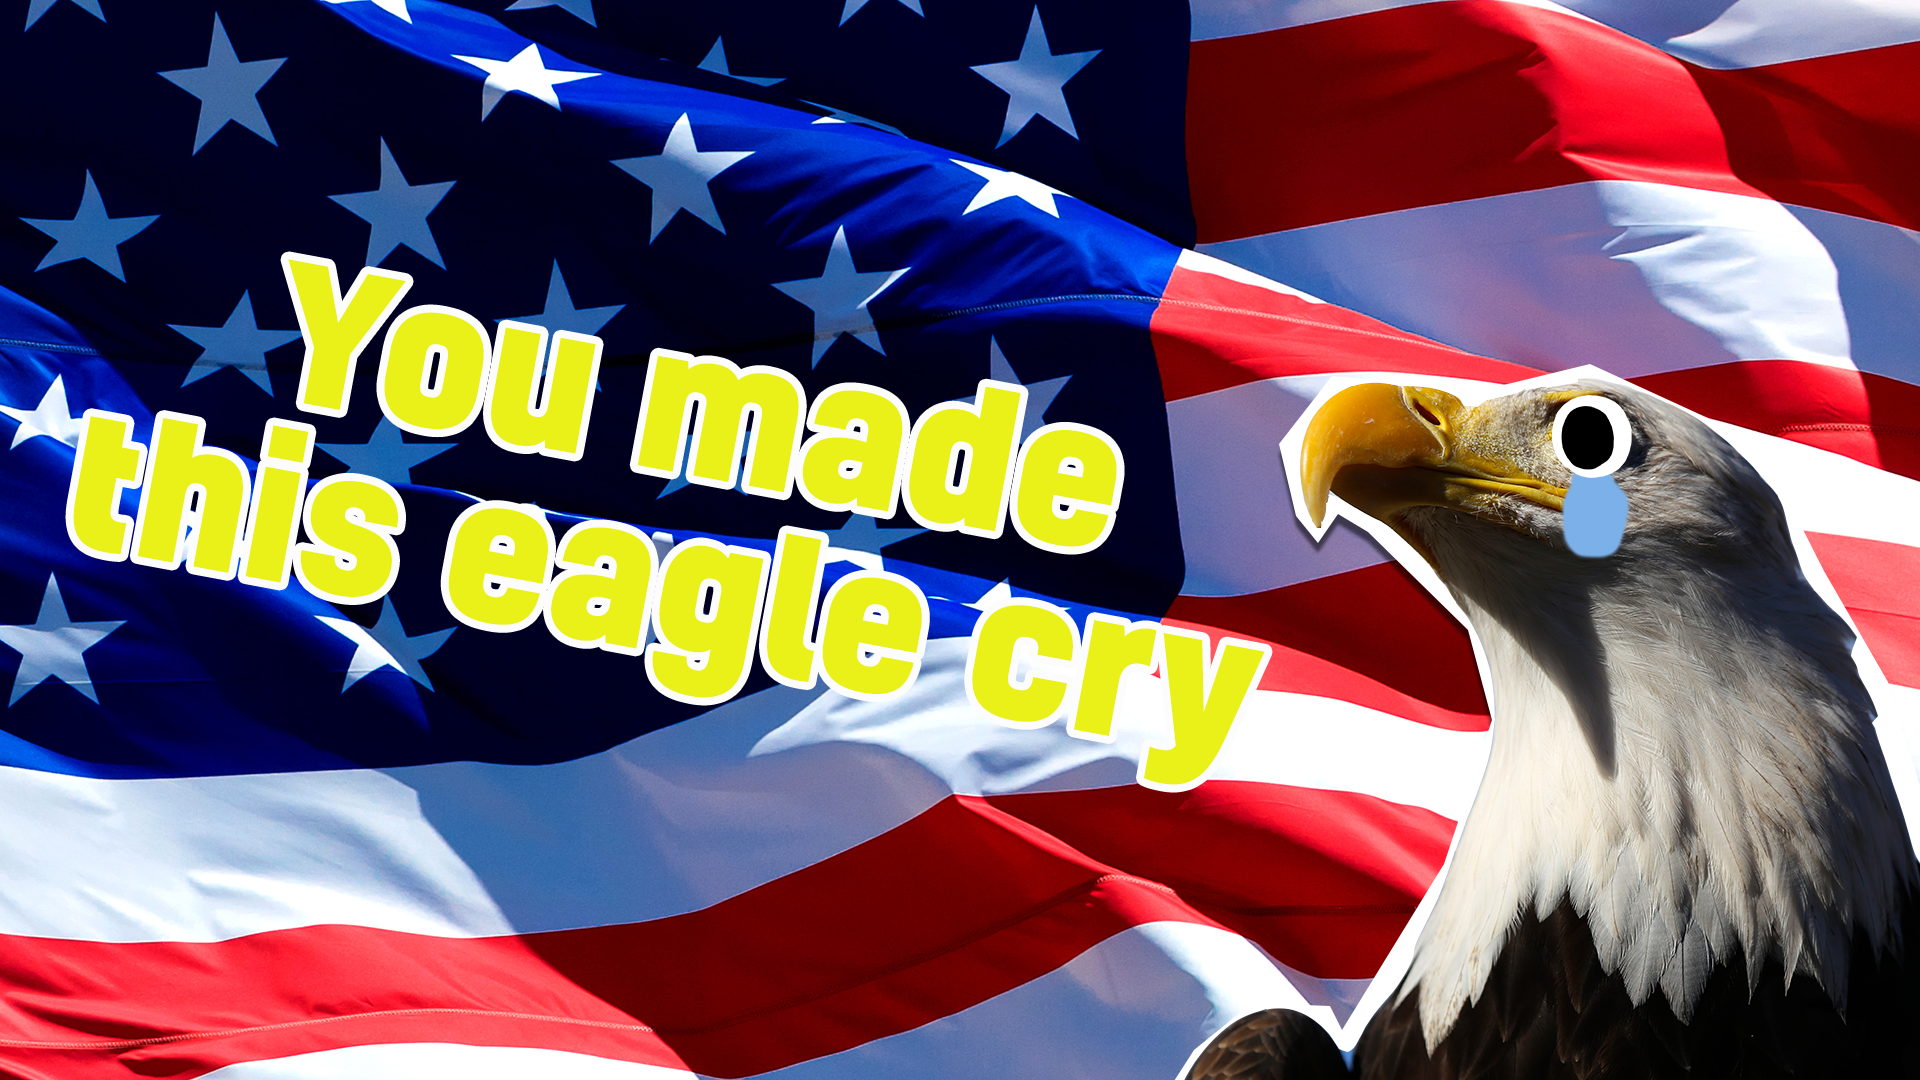 A crying eagle in front of the USA flag